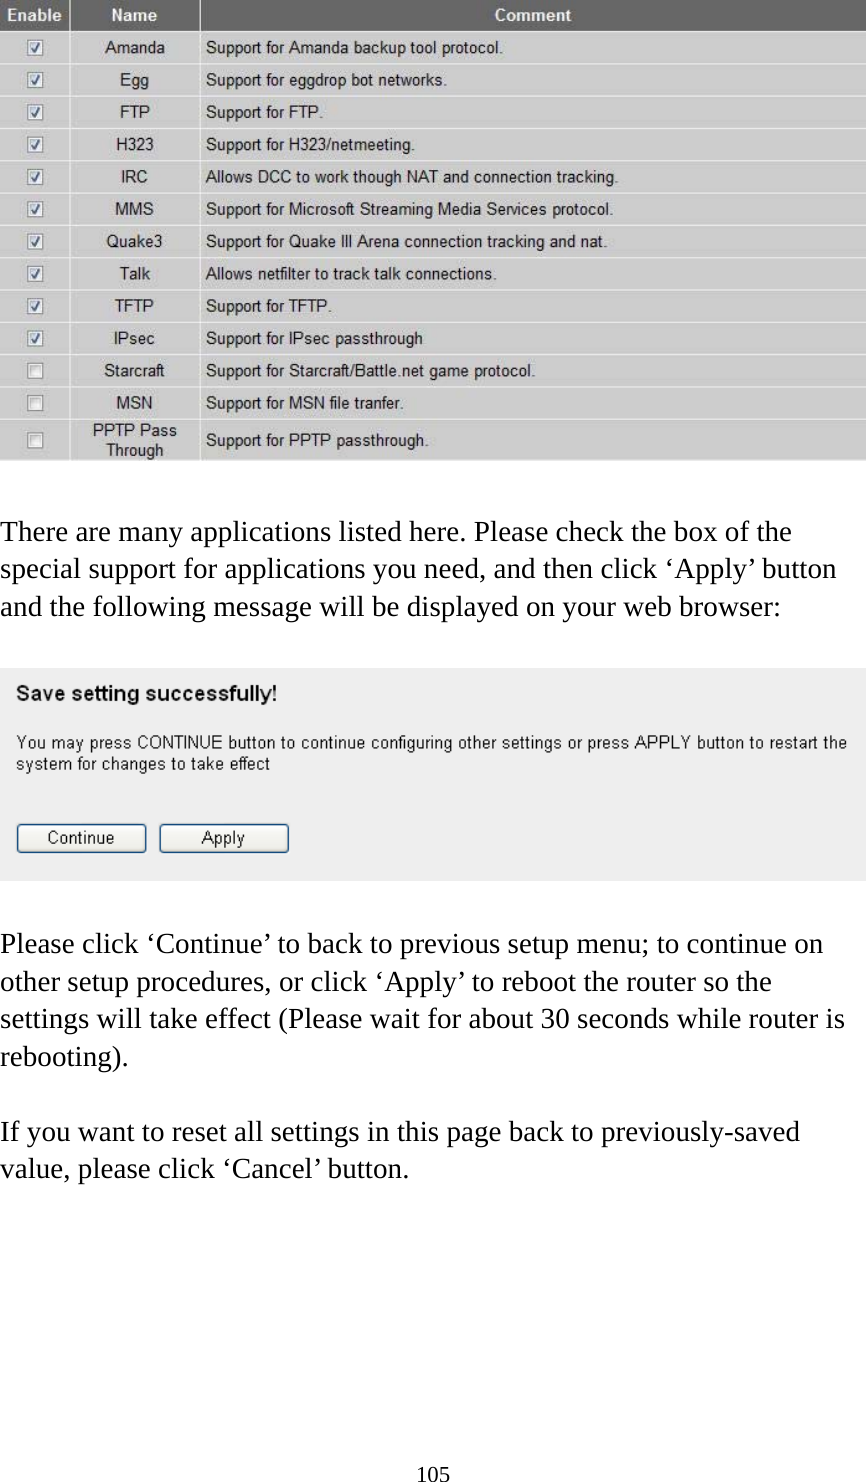 105   There are many applications listed here. Please check the box of the special support for applications you need, and then click ‘Apply’ button and the following message will be displayed on your web browser:    Please click ‘Continue’ to back to previous setup menu; to continue on other setup procedures, or click ‘Apply’ to reboot the router so the settings will take effect (Please wait for about 30 seconds while router is rebooting).  If you want to reset all settings in this page back to previously-saved value, please click ‘Cancel’ button.   